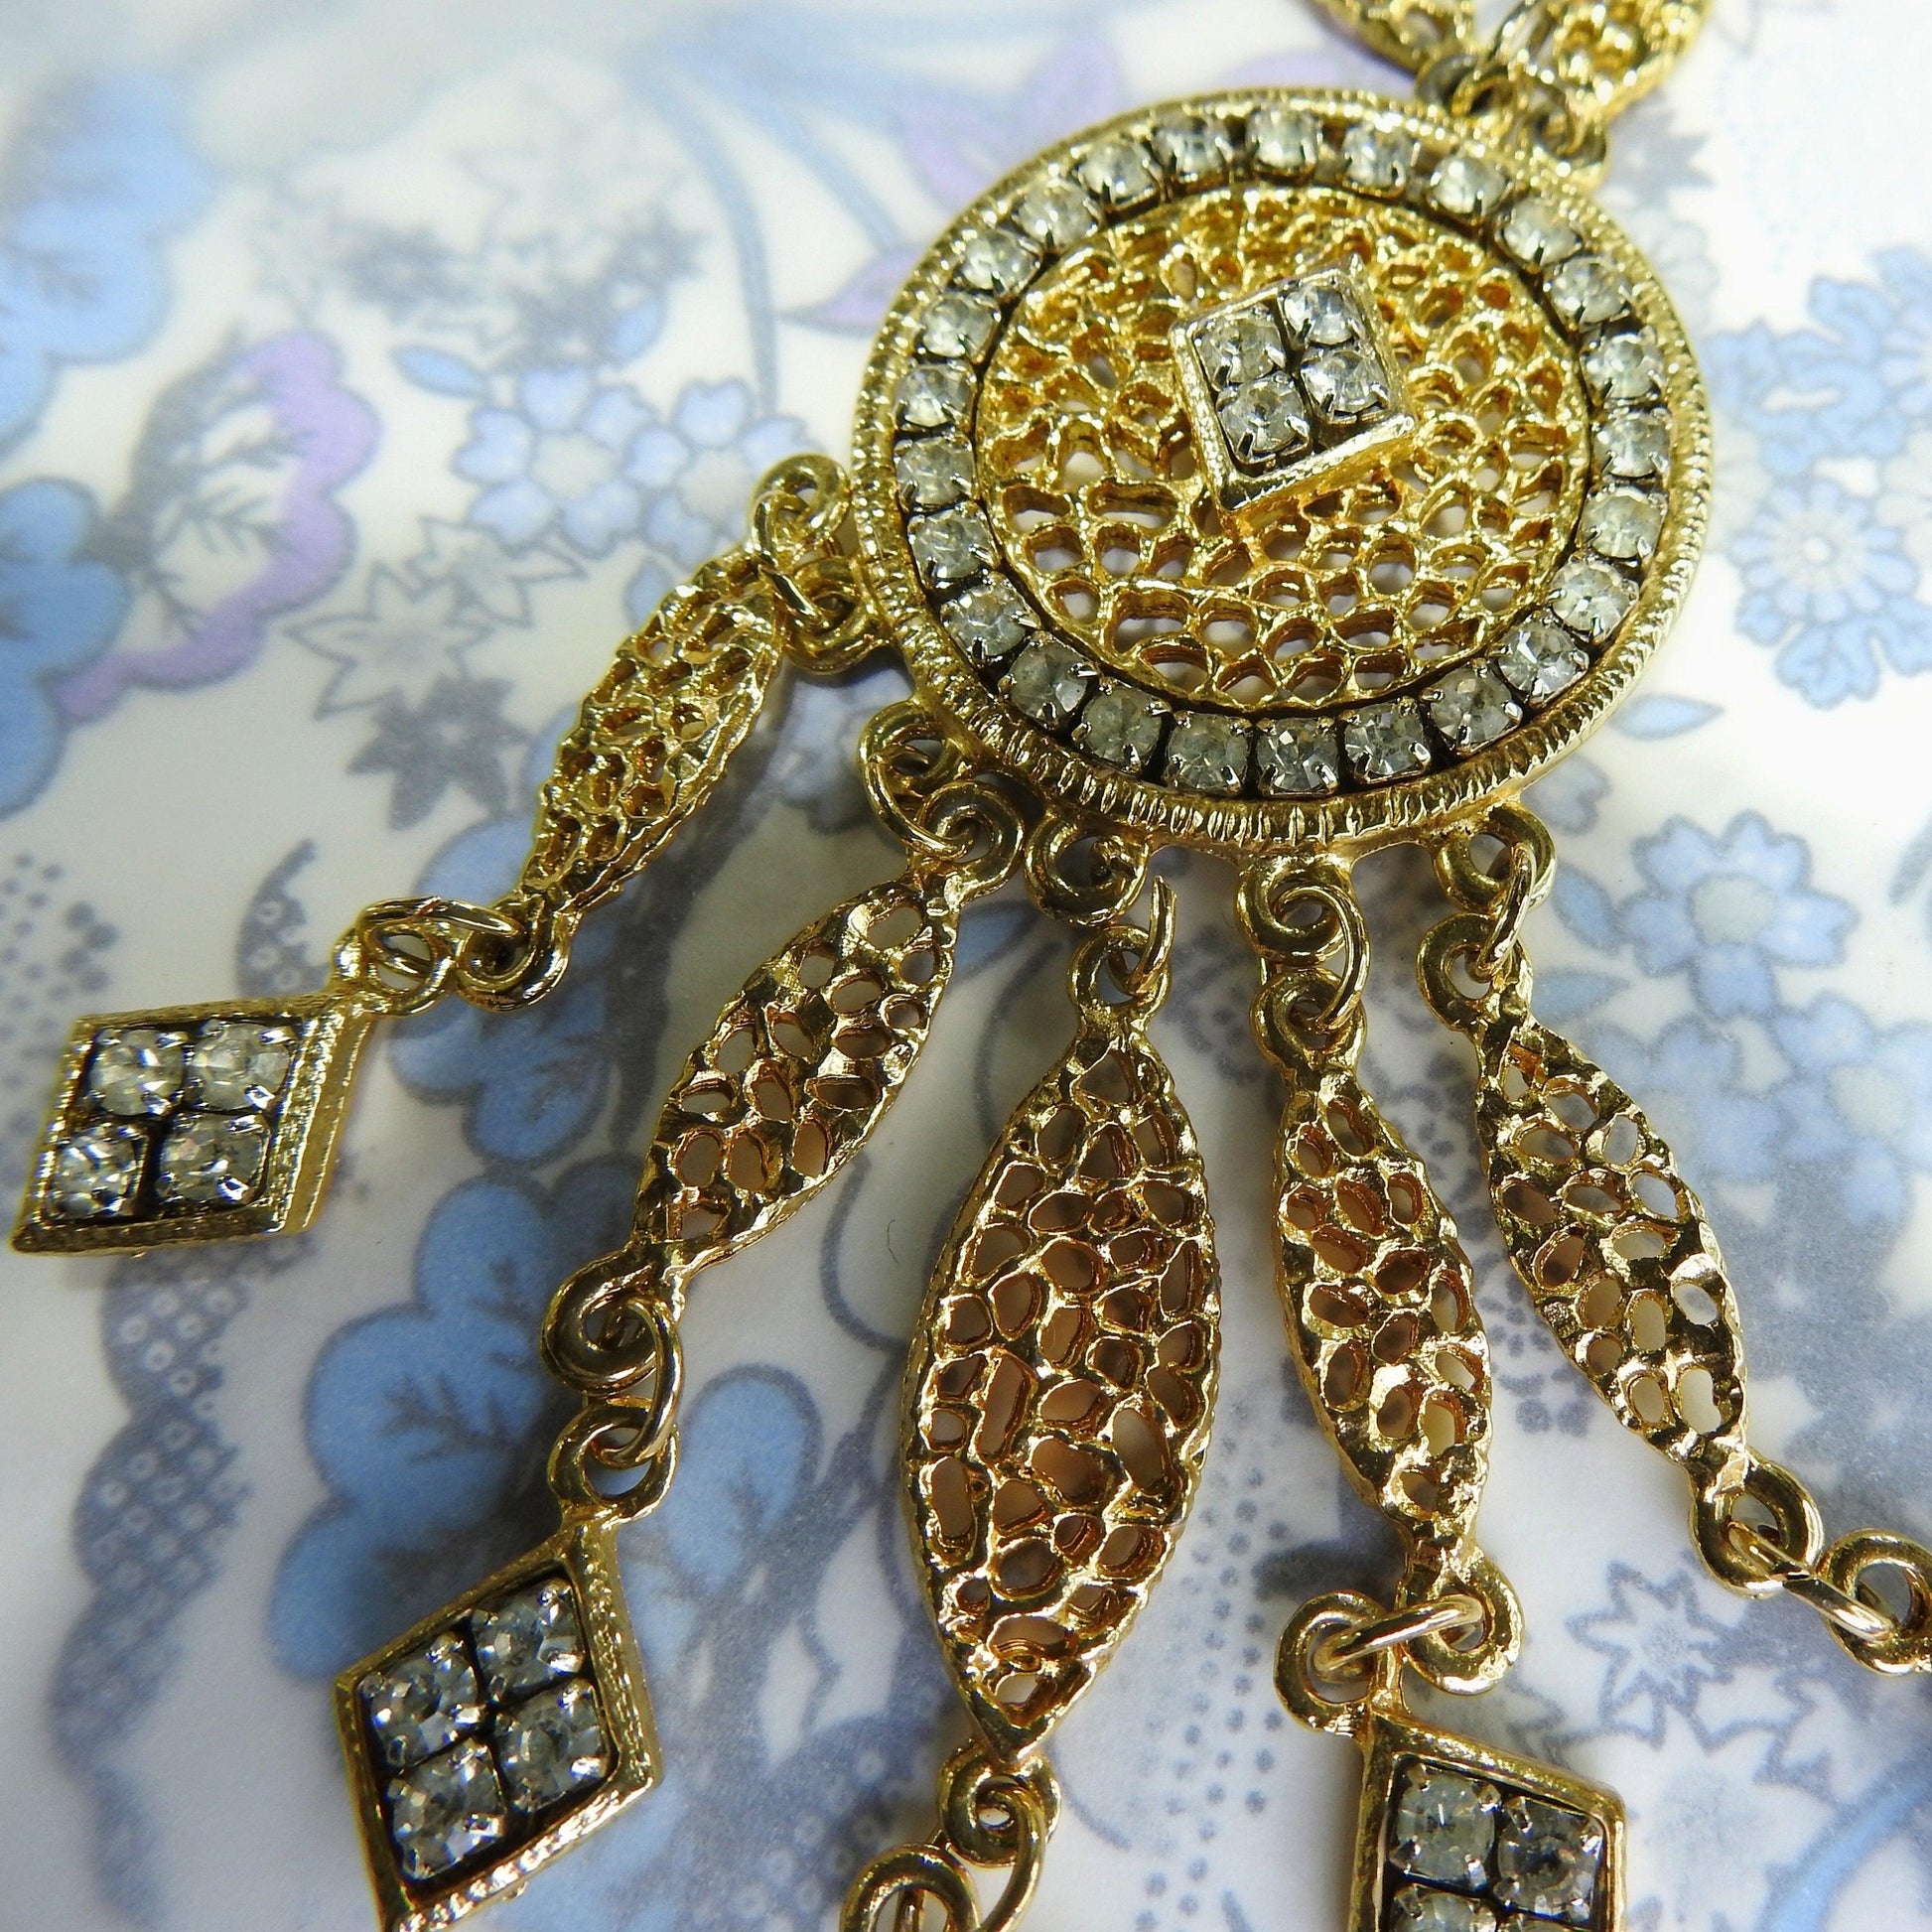 Vintage long gold pendant necklace with glass rhinestone, for business or evening wear and cocktail party.